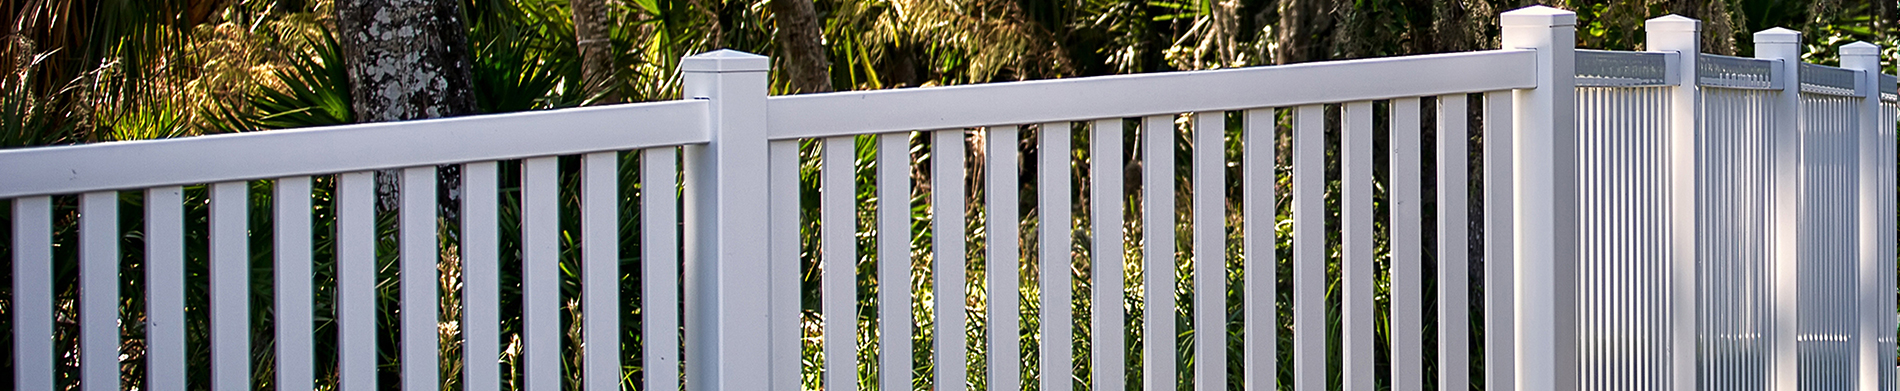 Vinyl Fences from Duramax Fences Provides All-Round Protection to Your Yard